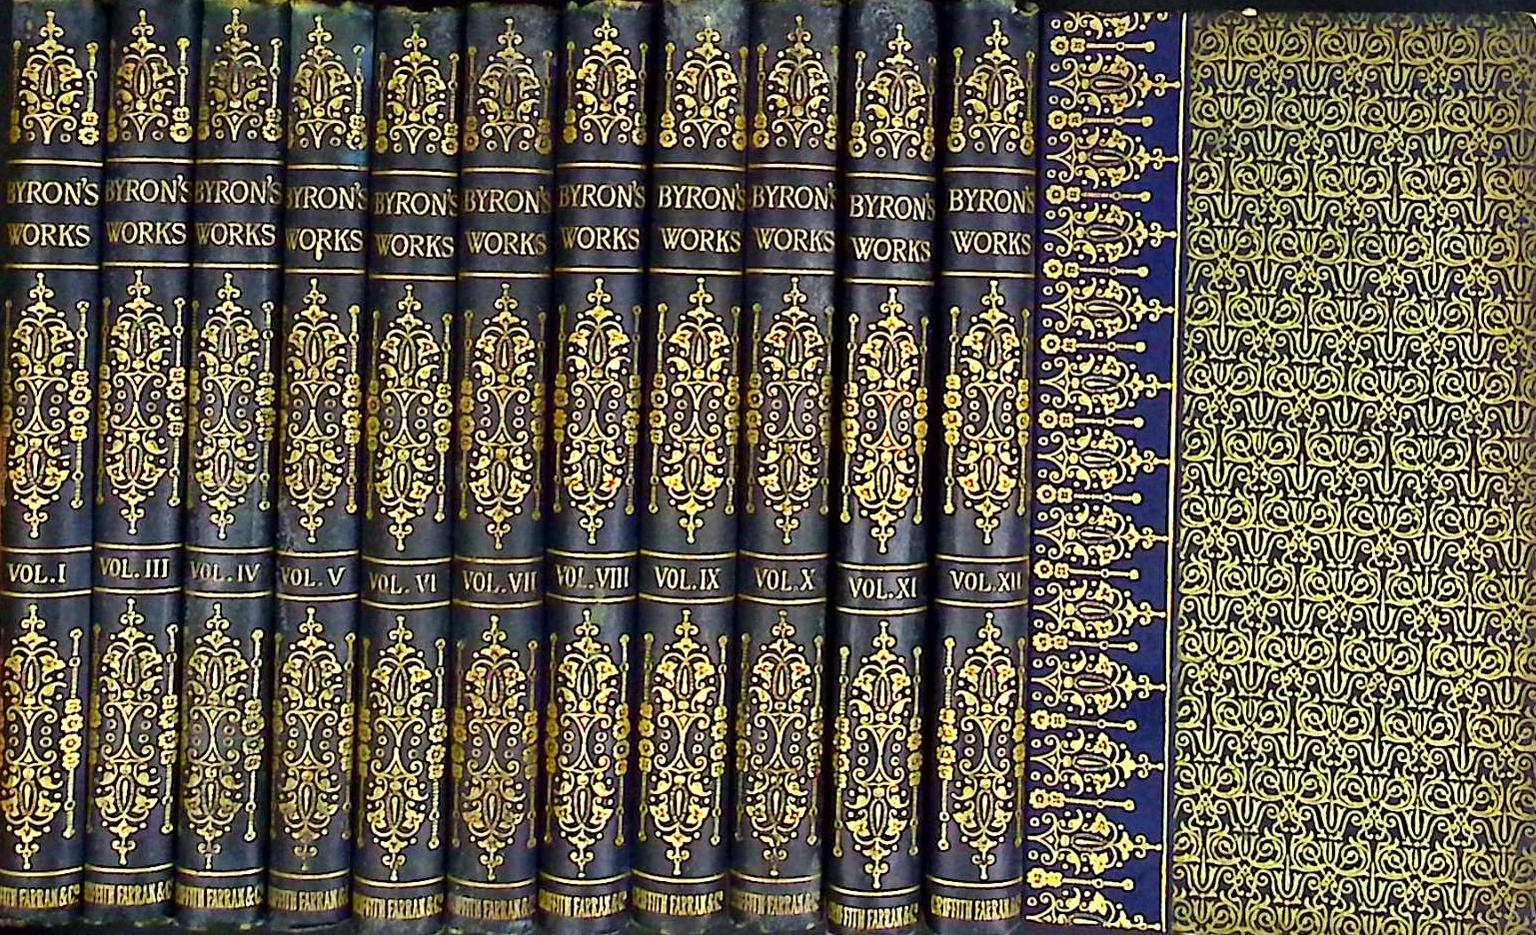 The Bijou Byron. The Poetical Works of Lord Byron, 11 (of 12) volume set.